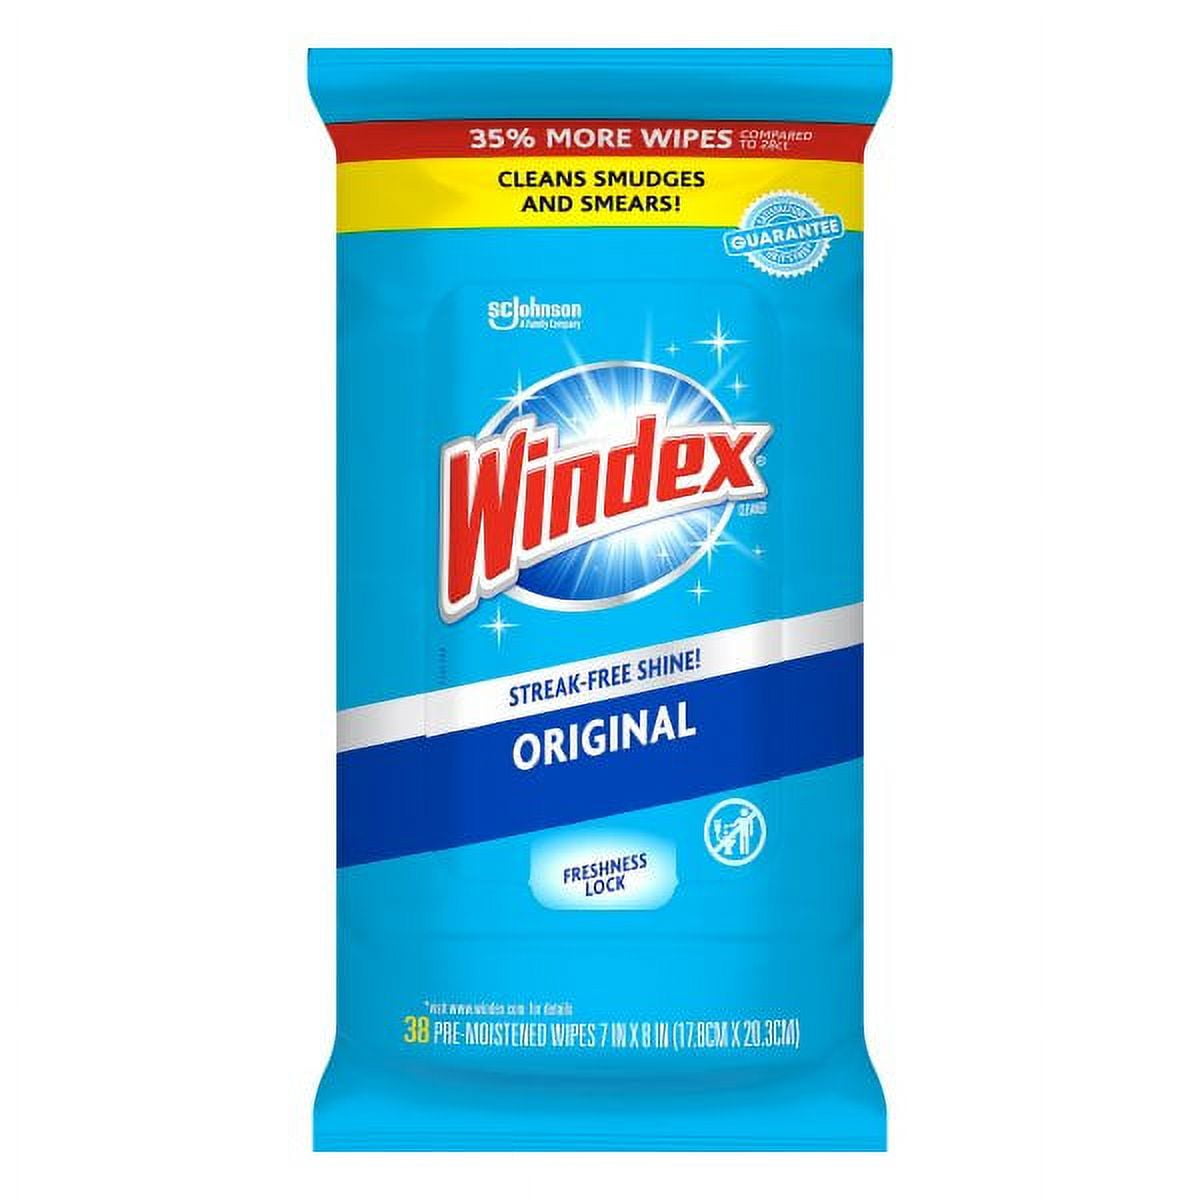 Windex Glass and Surface Pre-Moistened Wipes, Original, 38 Wipes, 3 ct